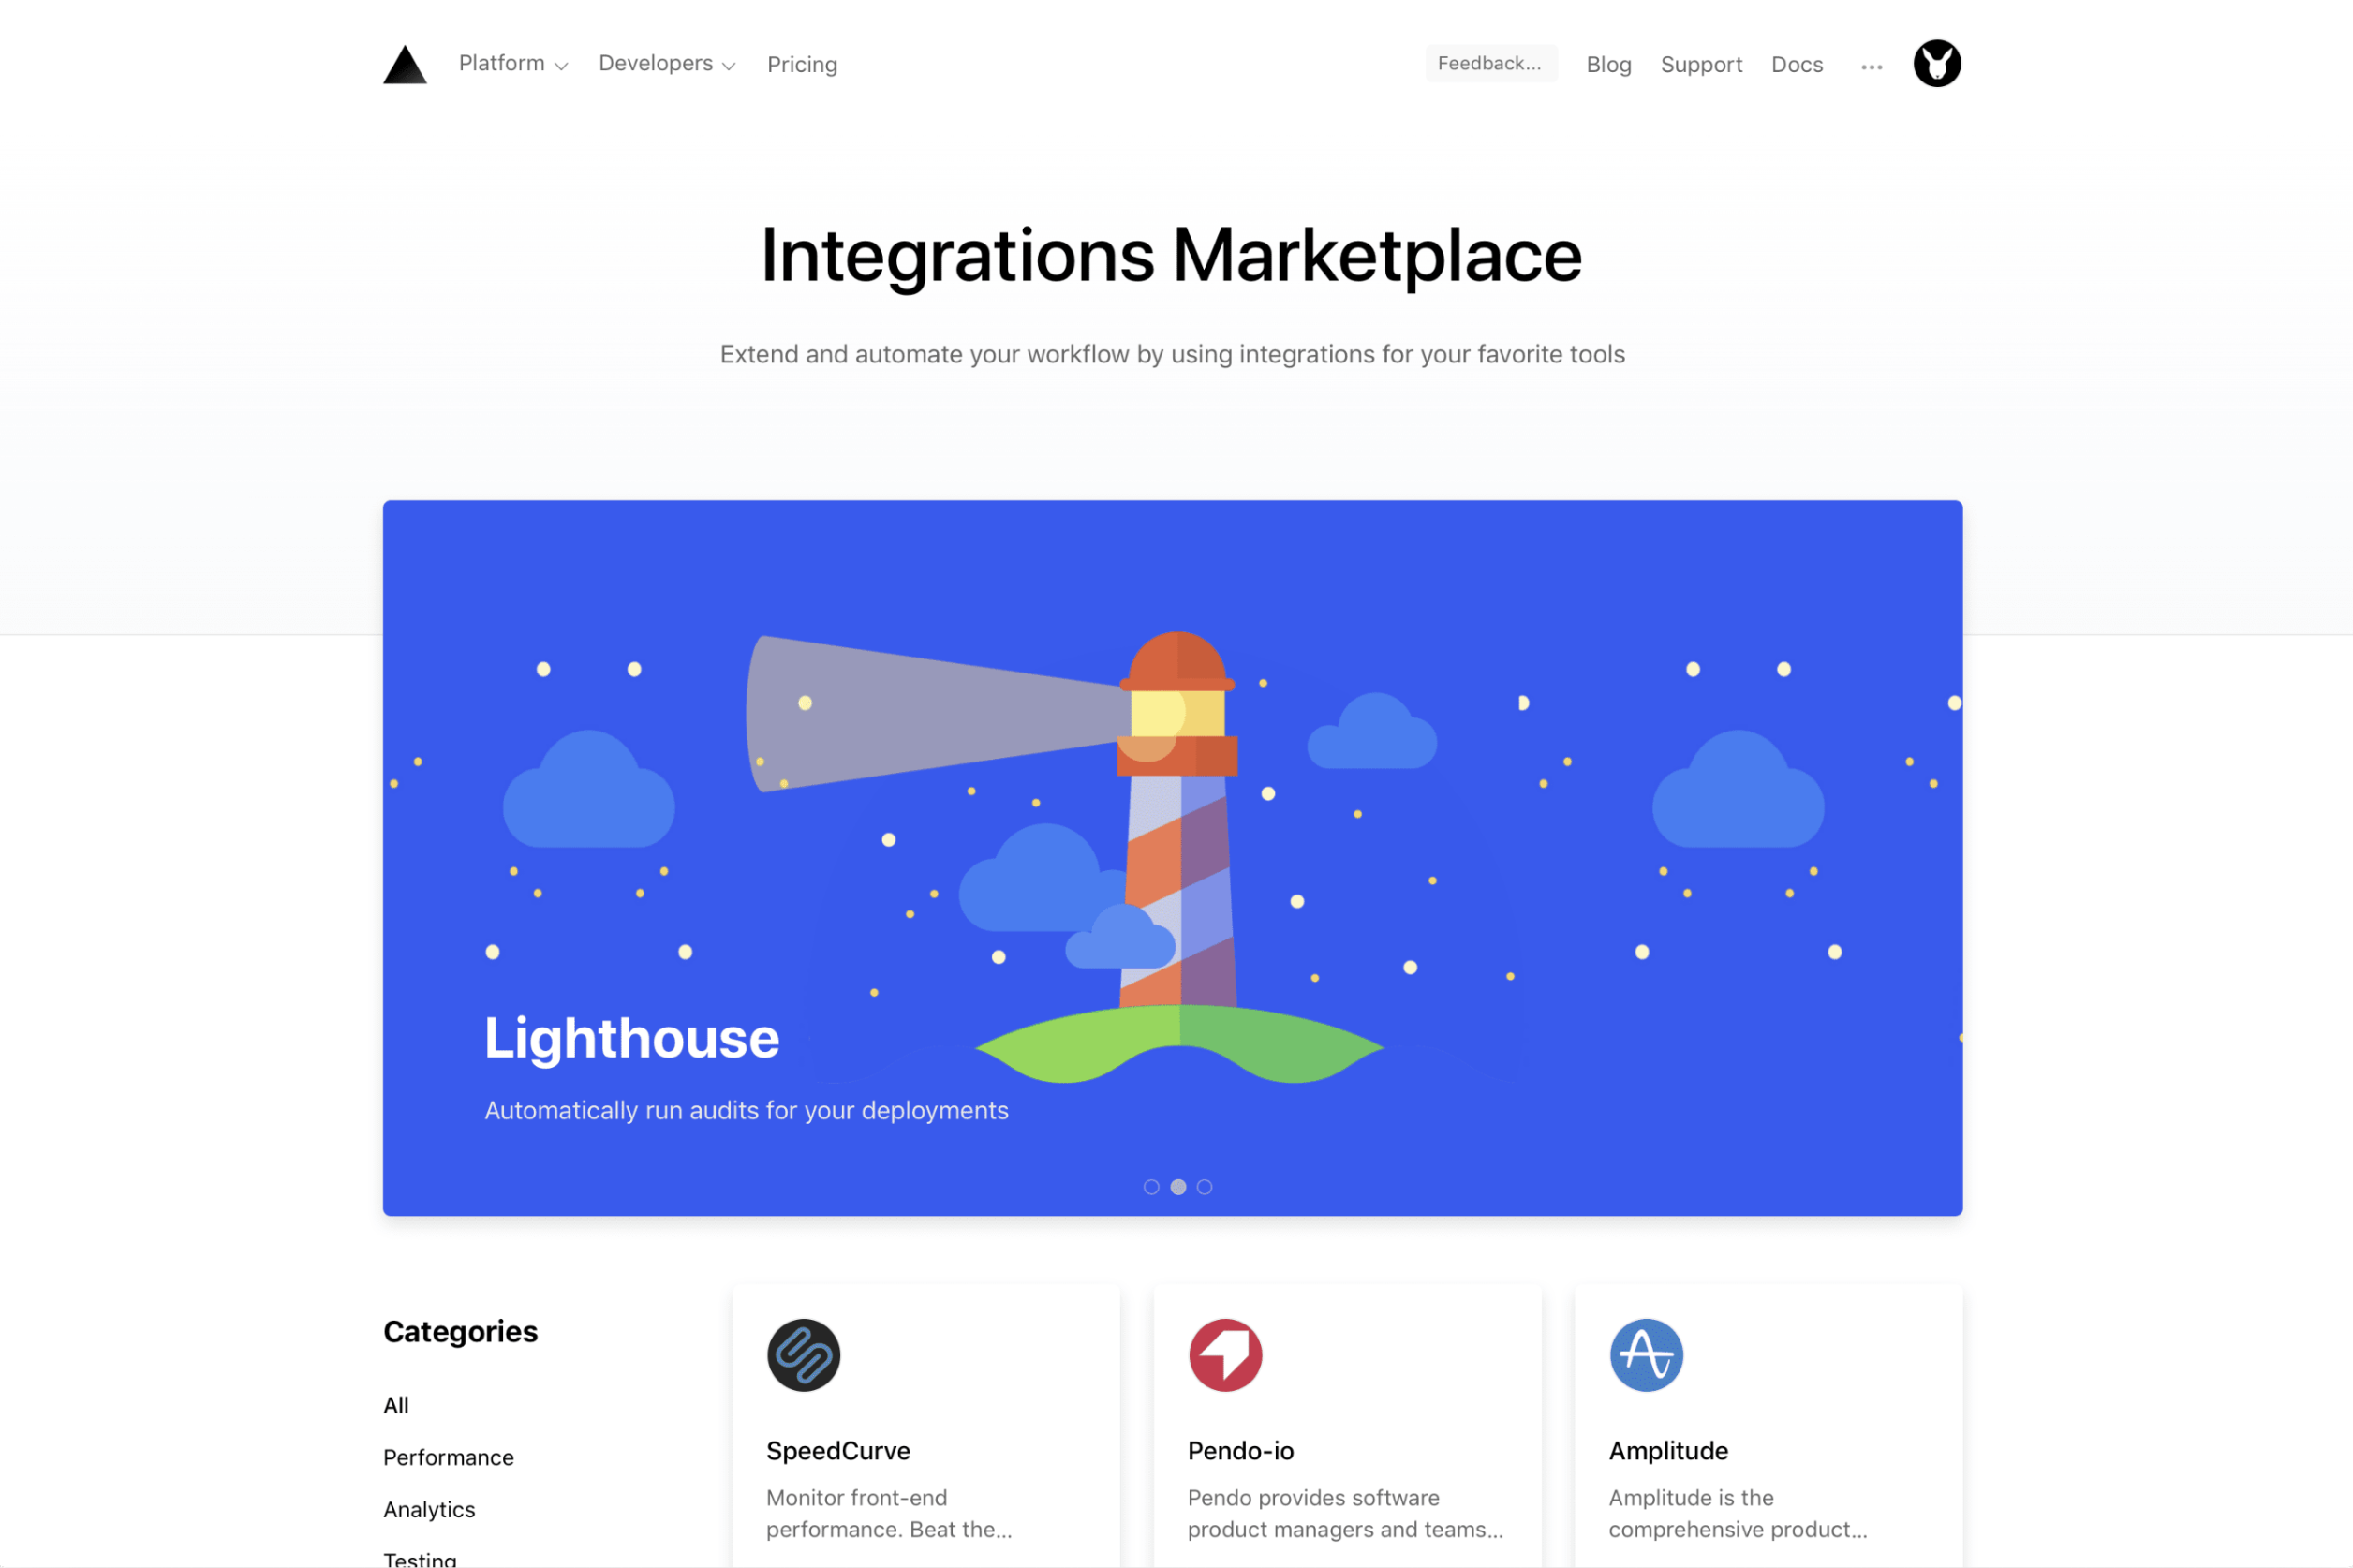 Lighthouse is one of the coolest (in my opinion) integrations on Vercel